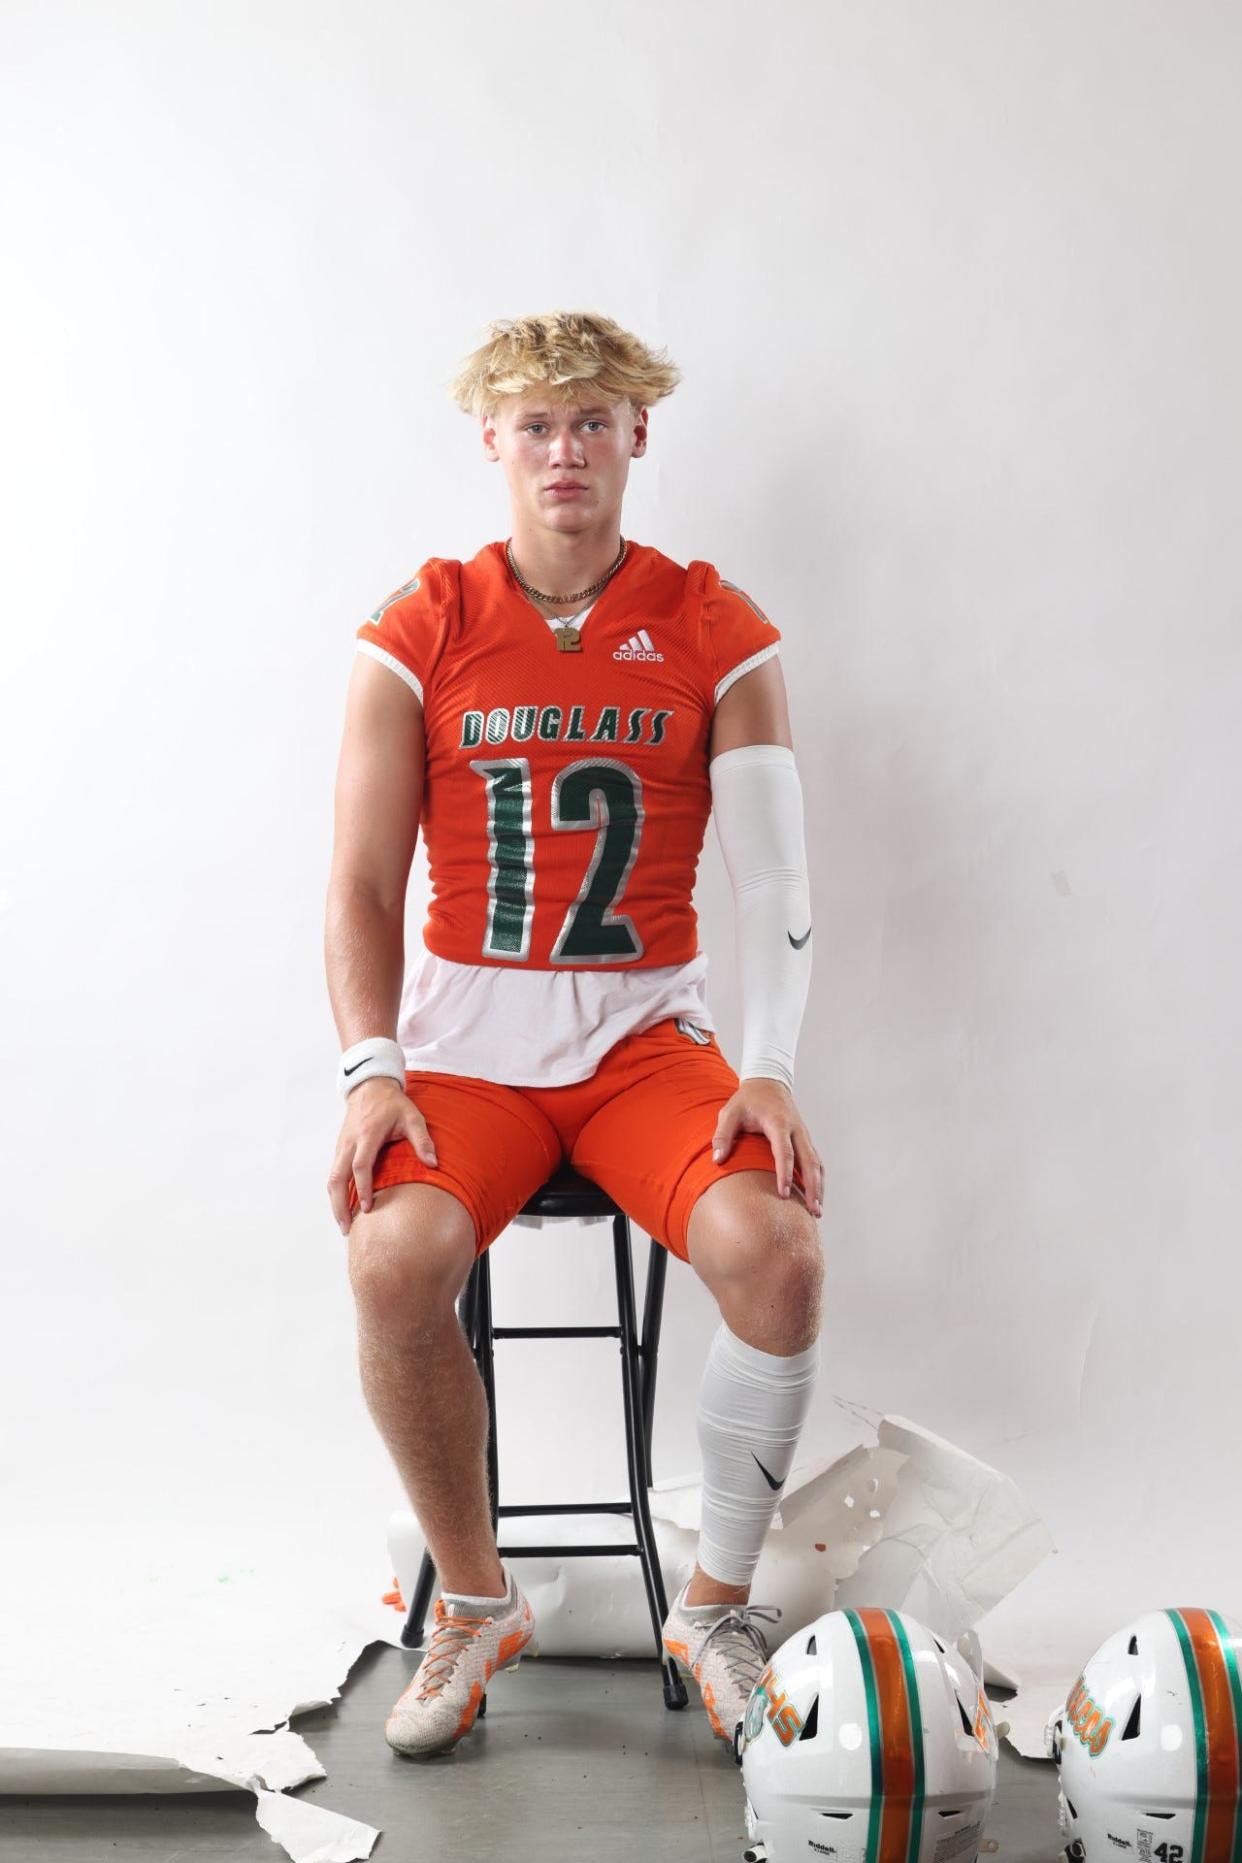 Frederick Douglass kicker Cooper Ranvier has been selected to The Courier Journal's All-State football first team.